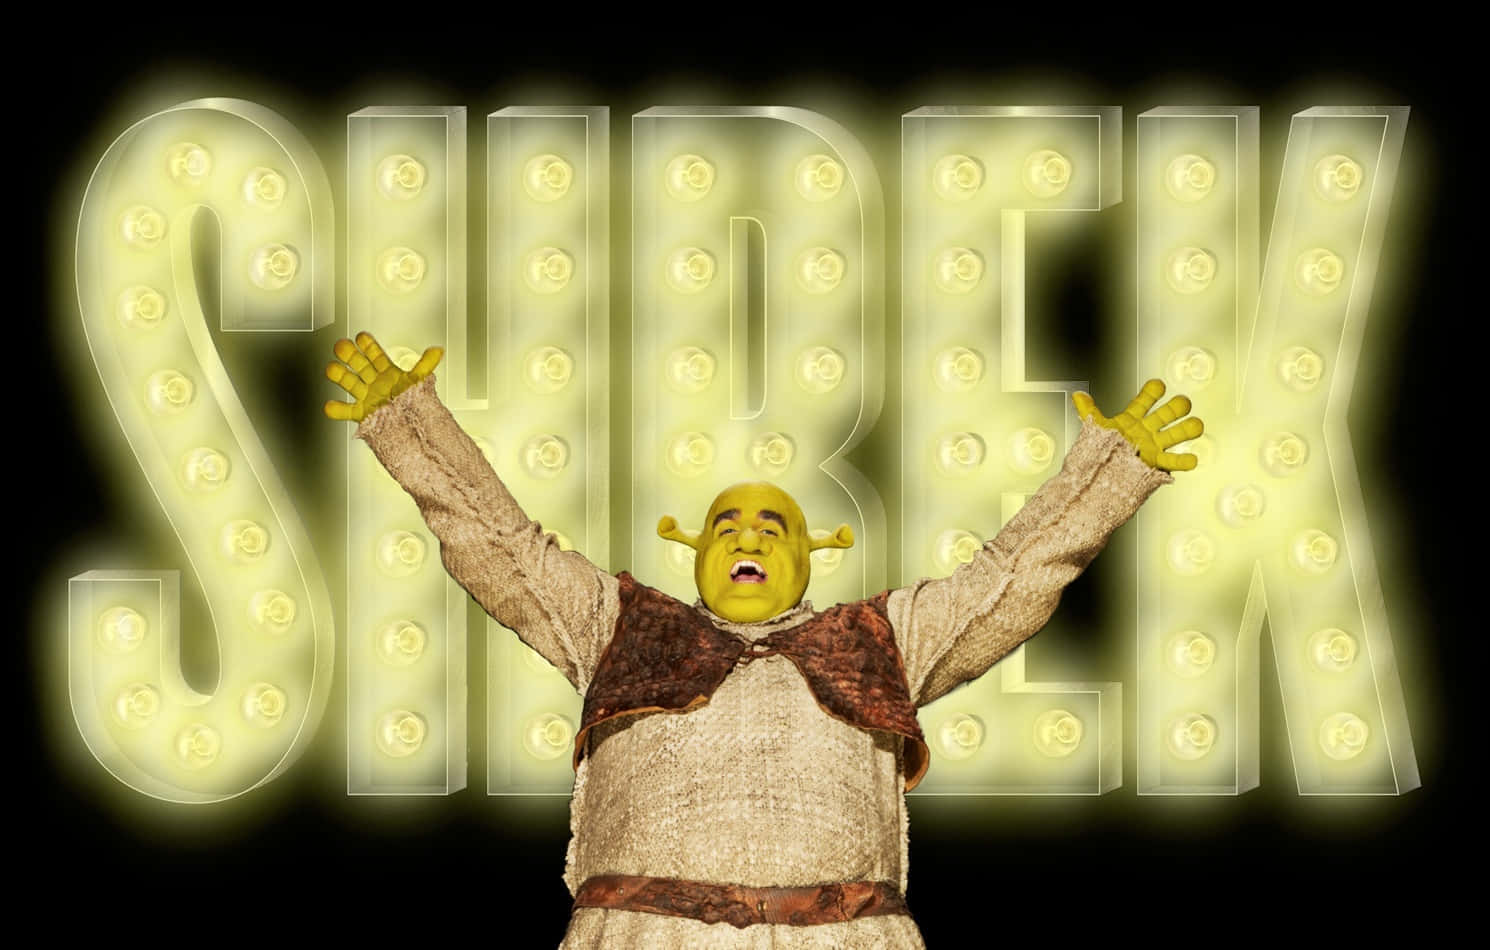 Enjoy Every Moment of Happiness with Shrek